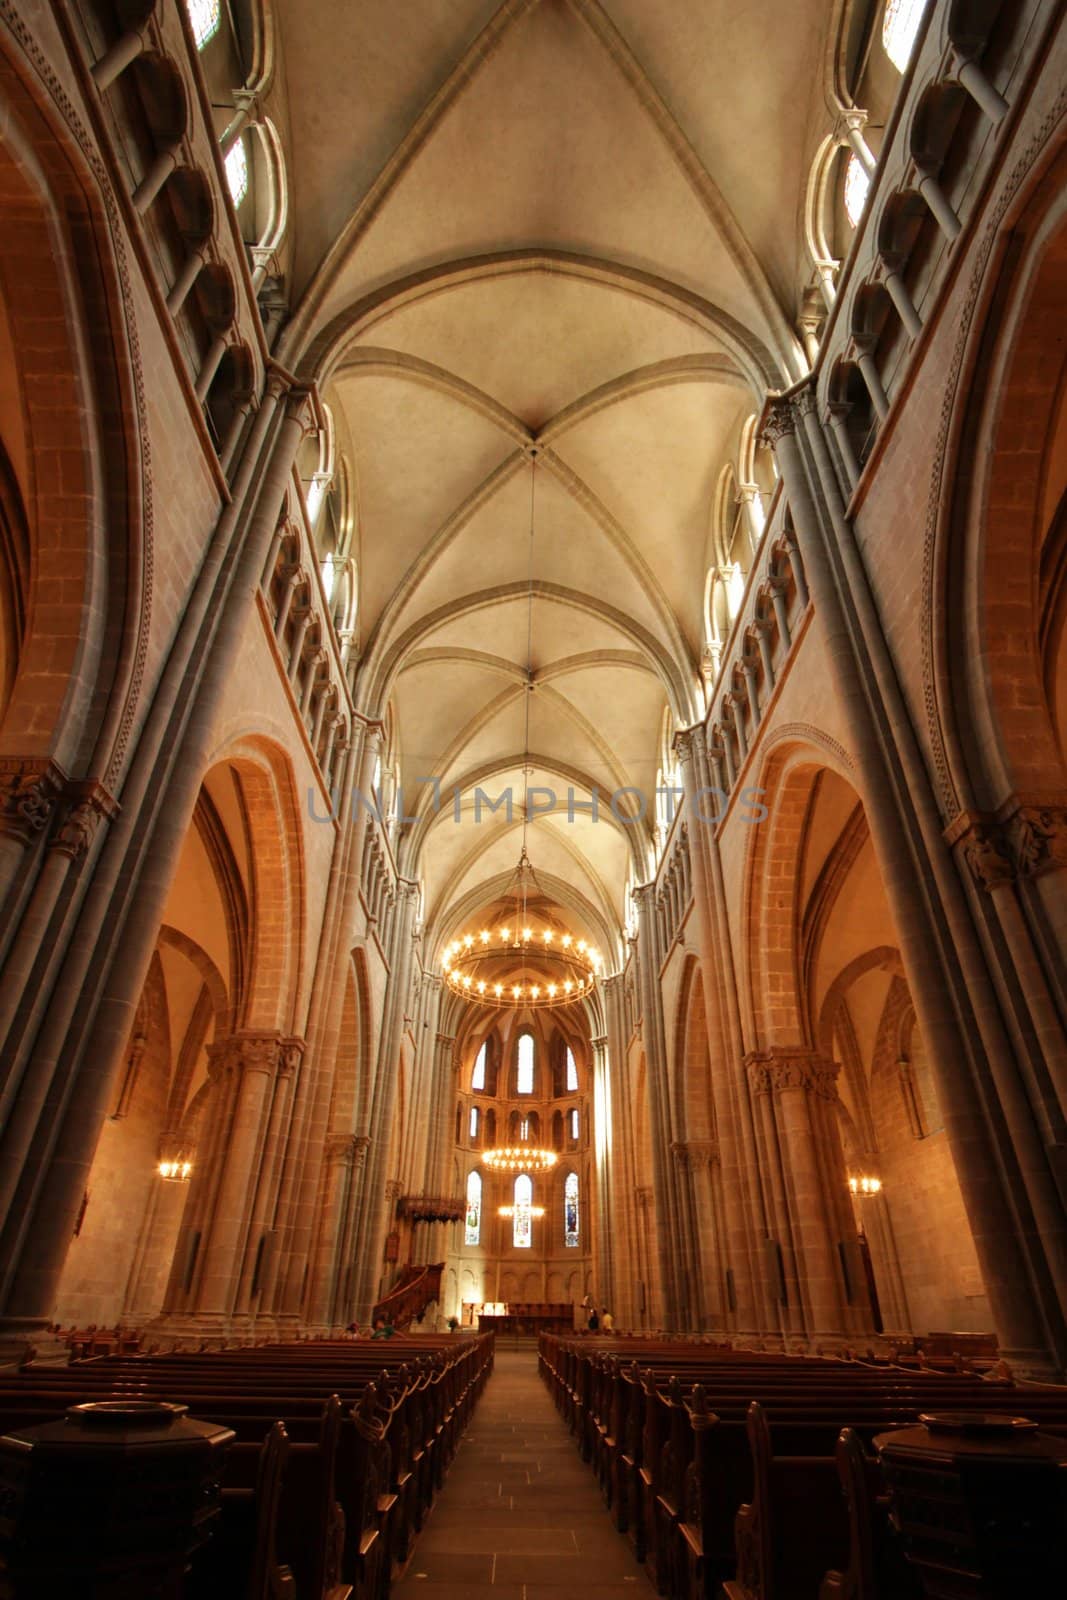 Inside the protestant Saint-Peter's cathedral in Geneva, Switzerland. The construction started in 1160 and lasted about one century. After that, it's been modified several times, sometimes because of fire. At XVI century, when the protestant Reformation advented, the inside was modified to have less decoration.